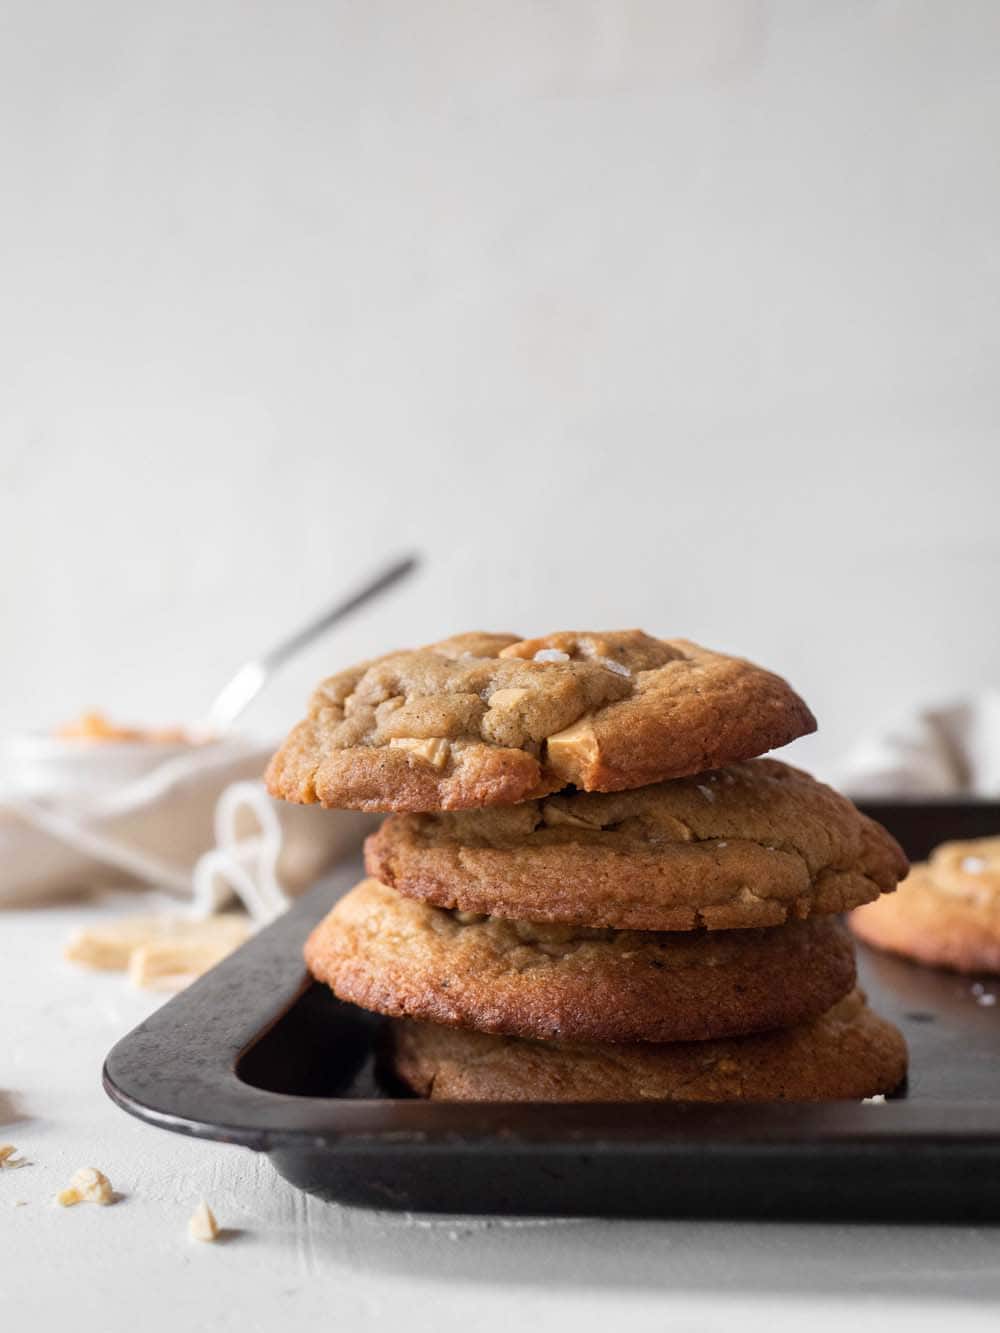 Miso Brown Butter Chocolate Chip Cookies - Catherine Zhang